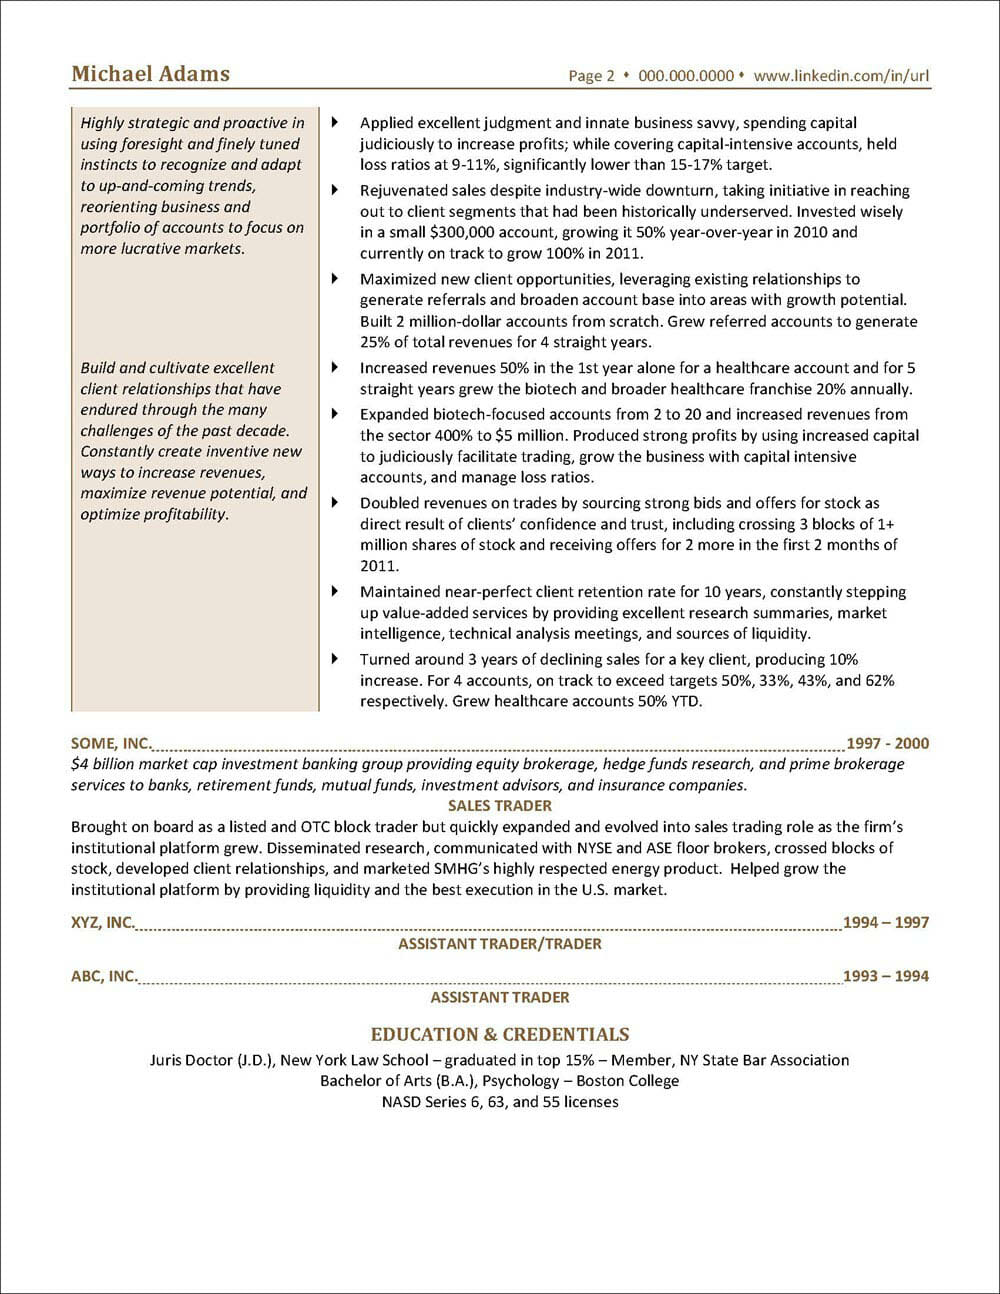 Example Investment Banking Resume